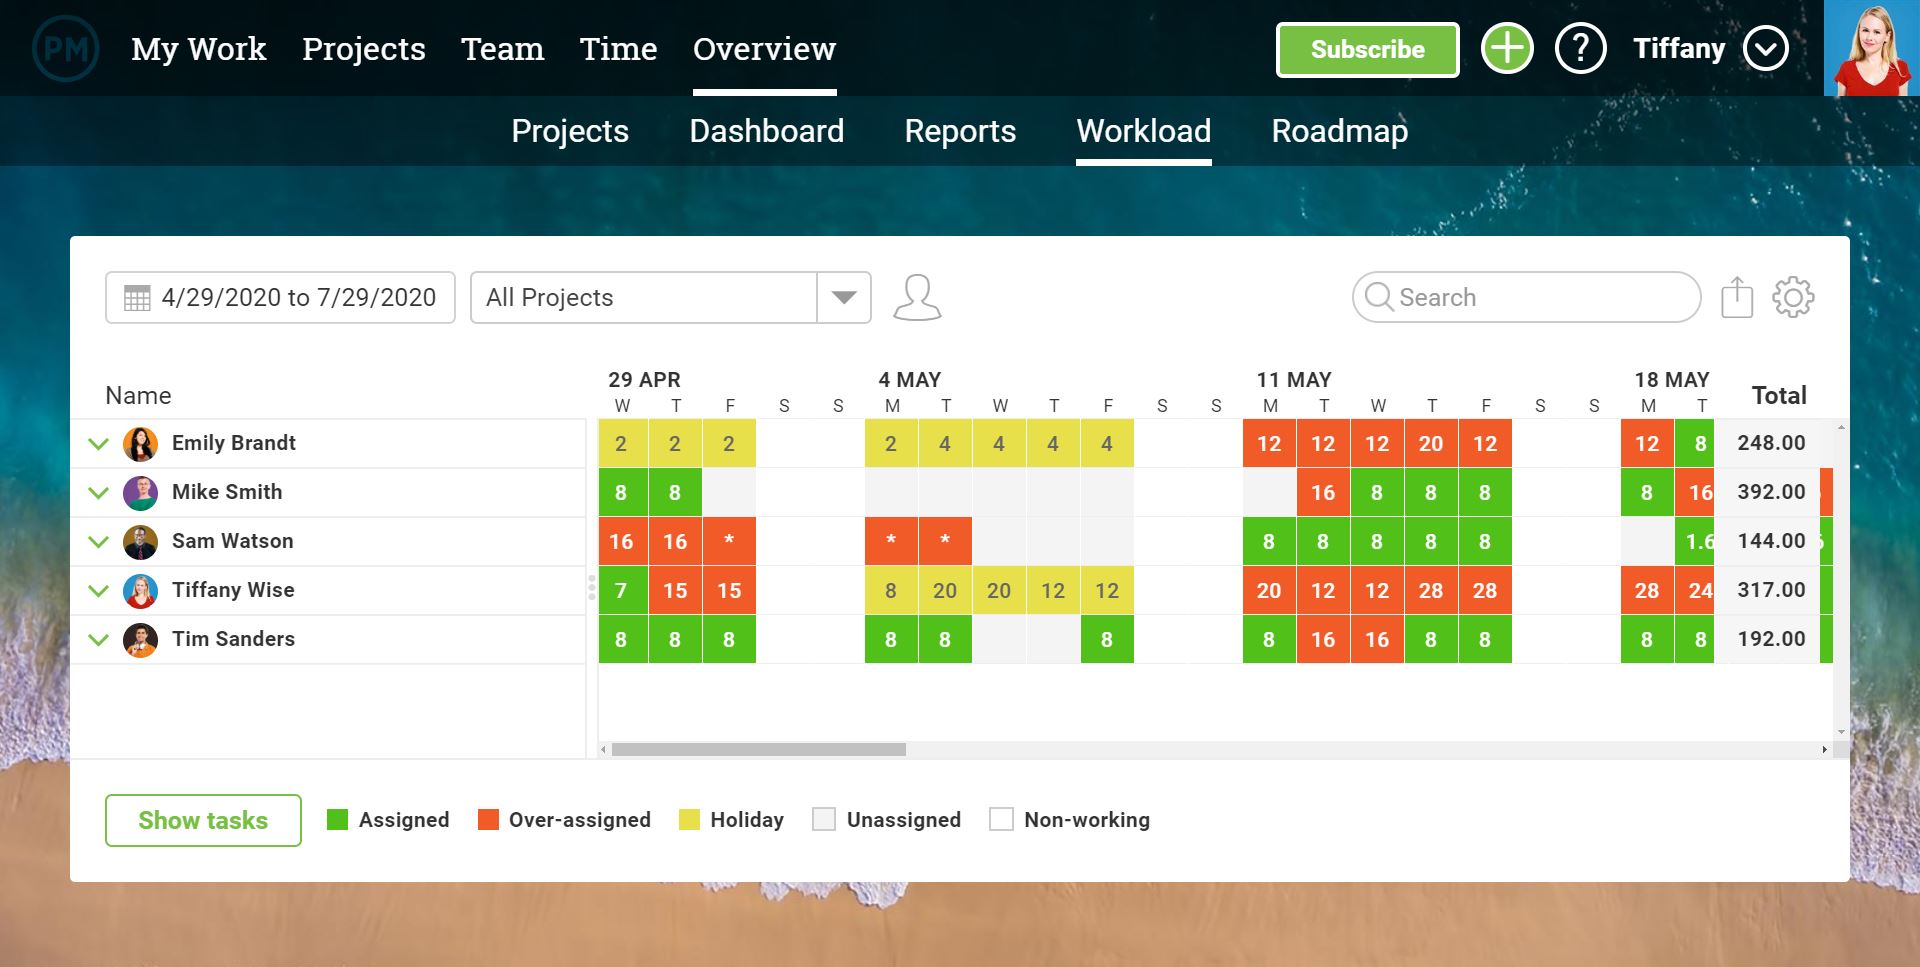 A screenshot of ProjectManager.com's workload page, which shows a list of team members and the amount of tasks they're working on throughout the week.